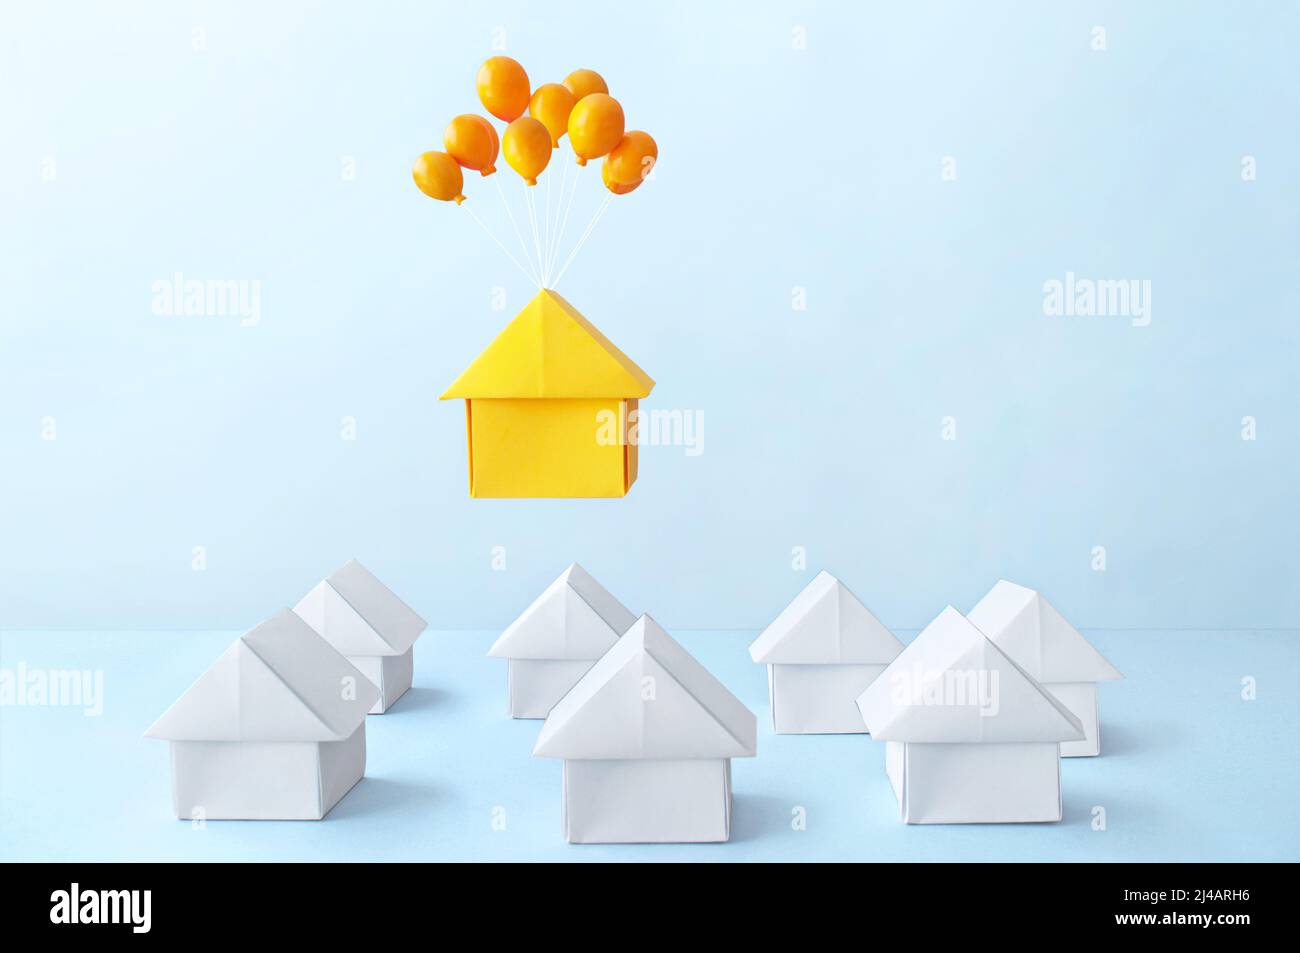 Orange paper house with balloons floating above many houses Stock Photo